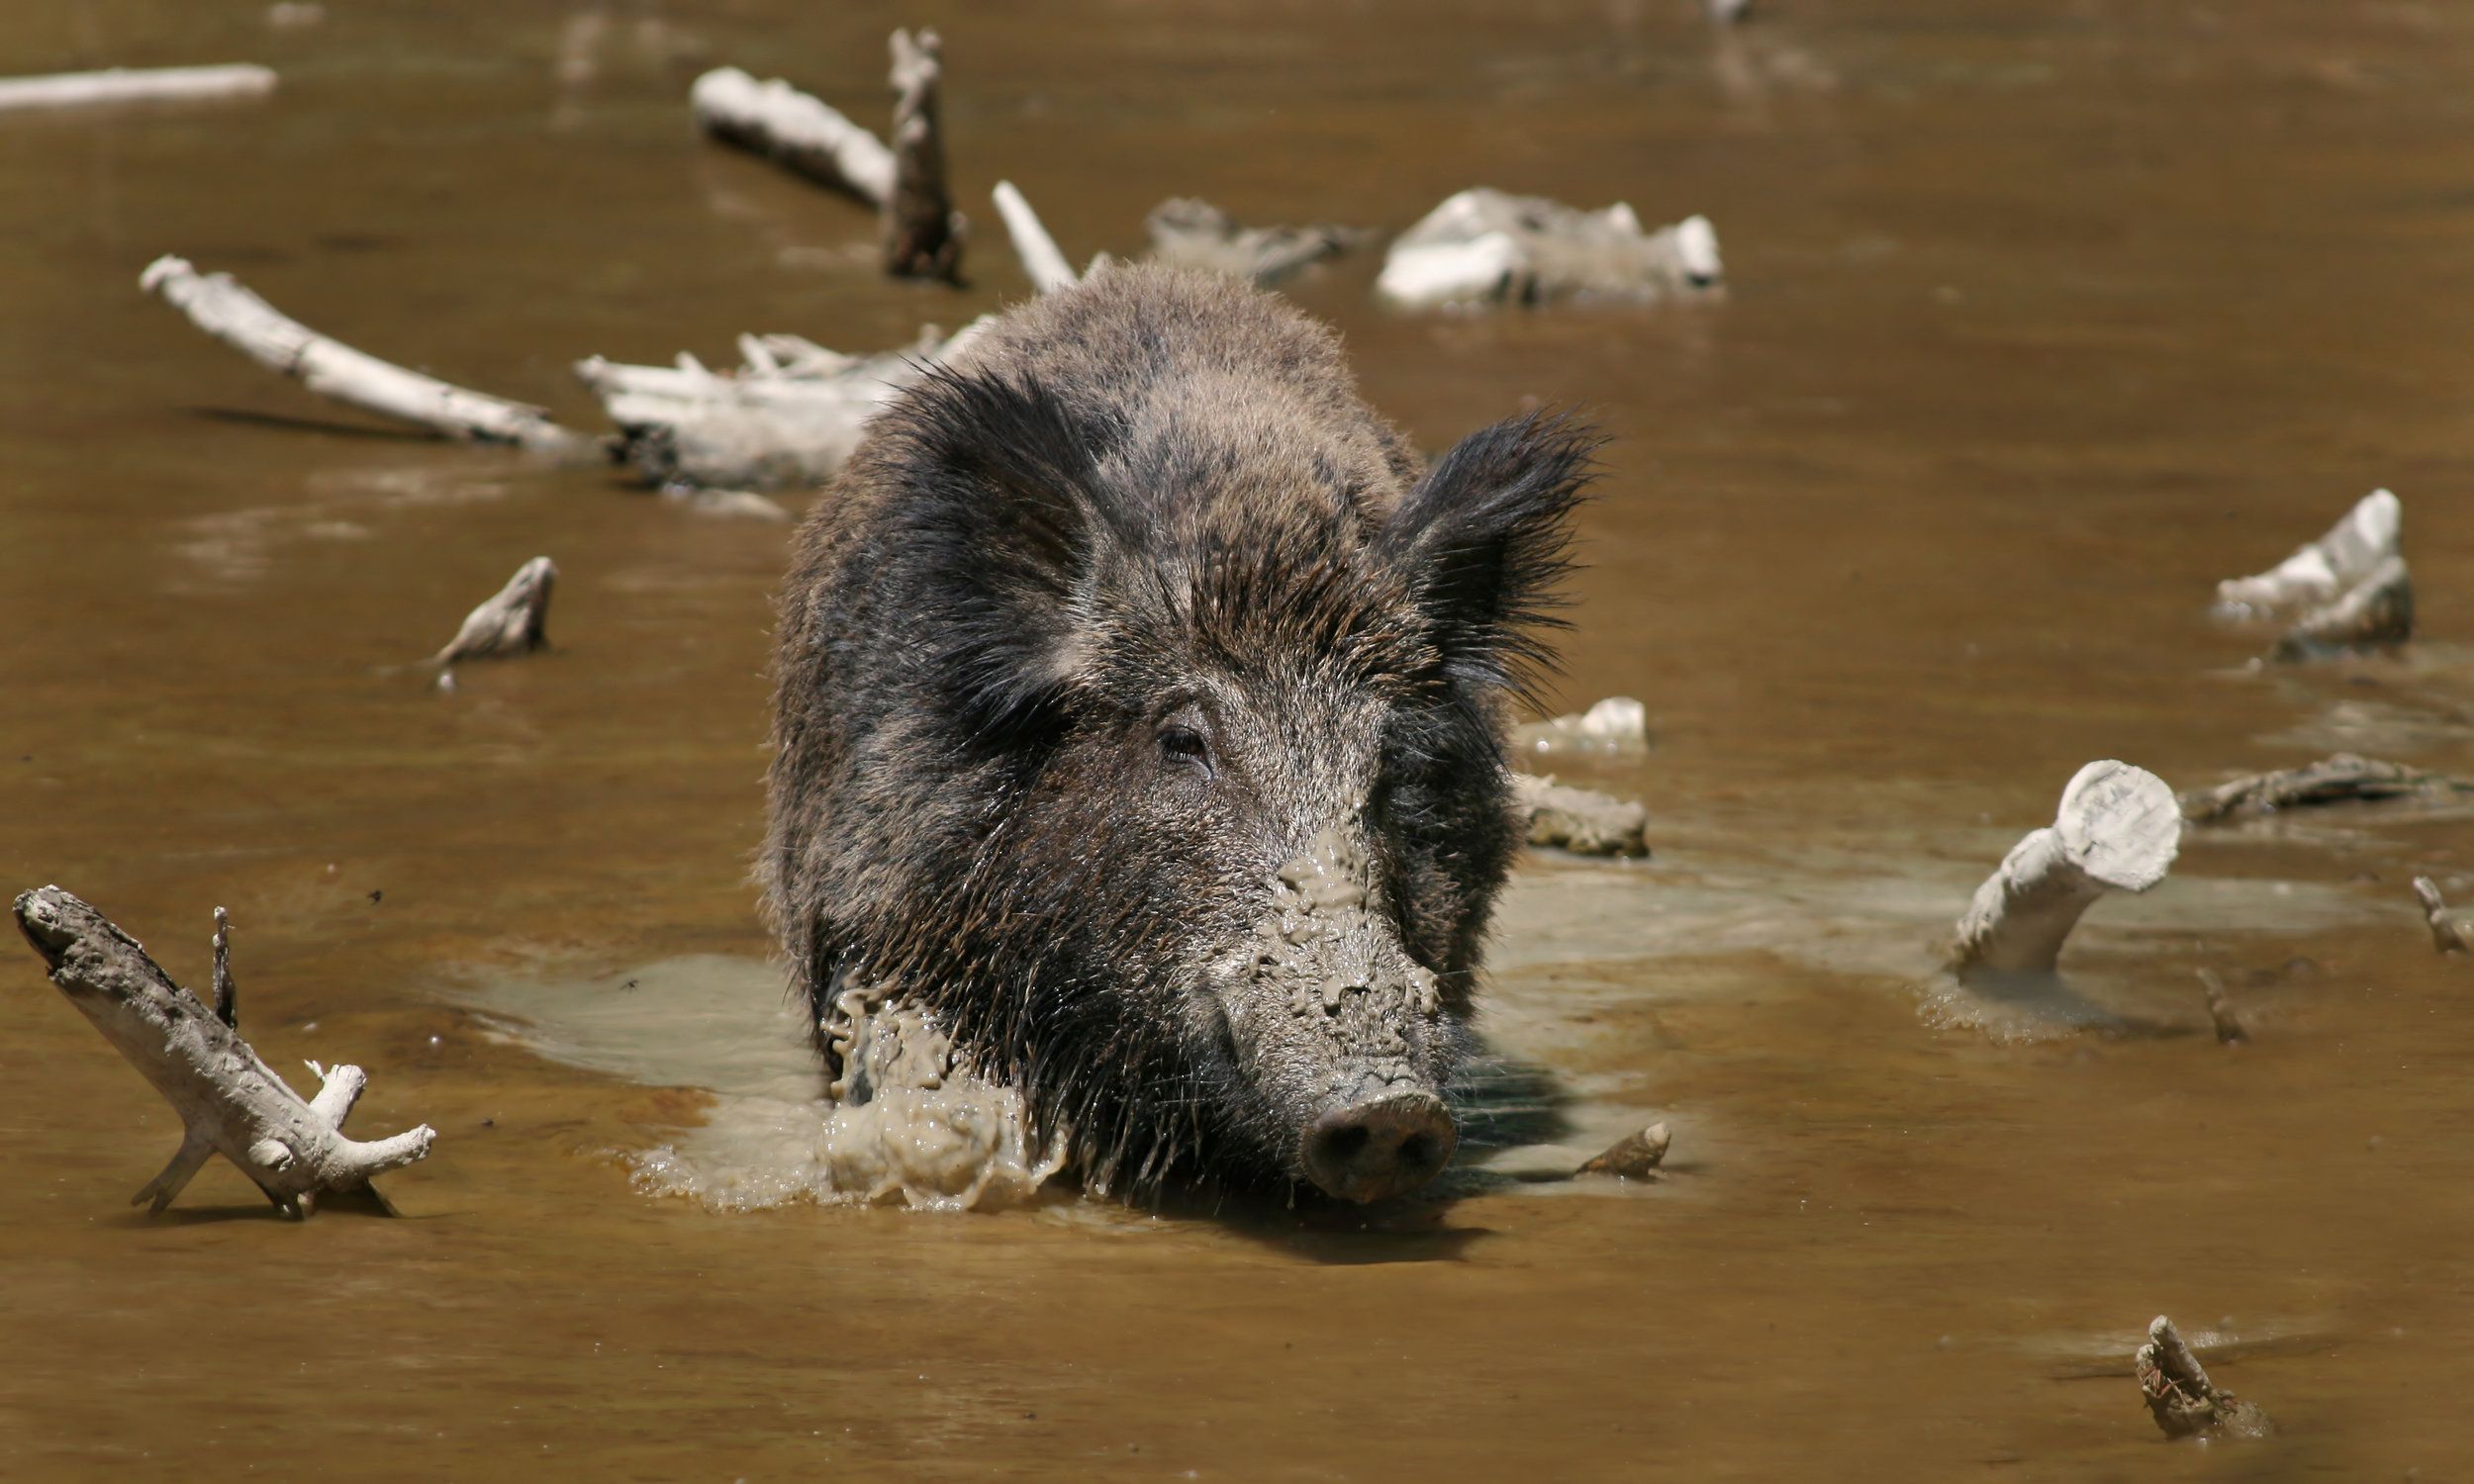 A wild hog in the mud, hunting wild hogs concept. 